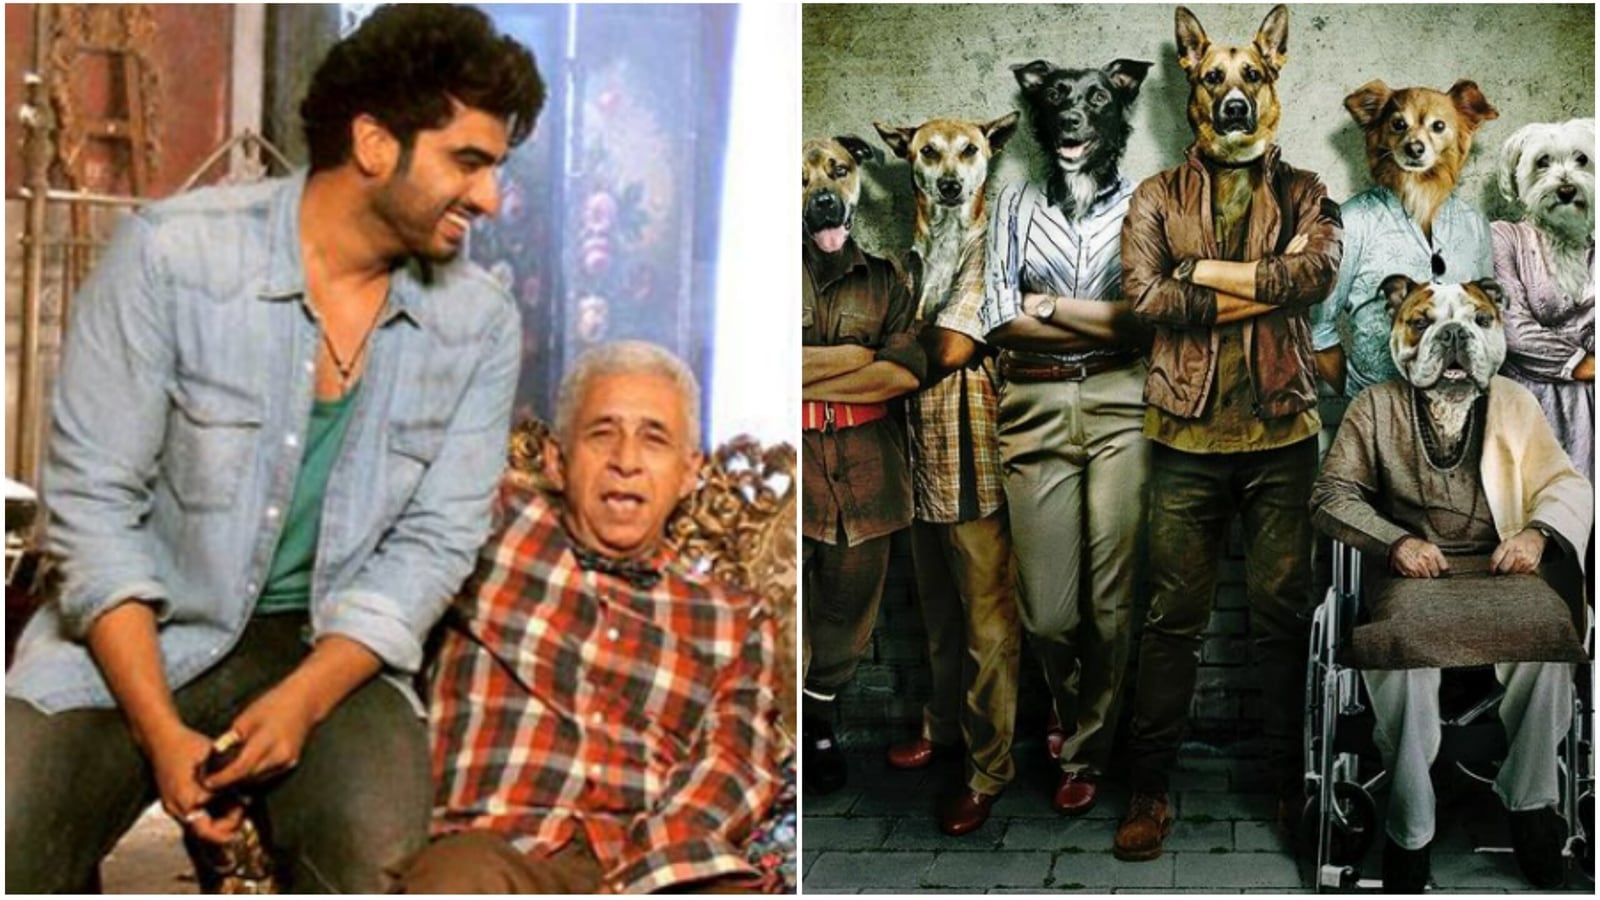 Arjun Kapoor says Naseeruddin Shah hugged him on Kuttey set, praised his work: ‘There is no greater compliment’